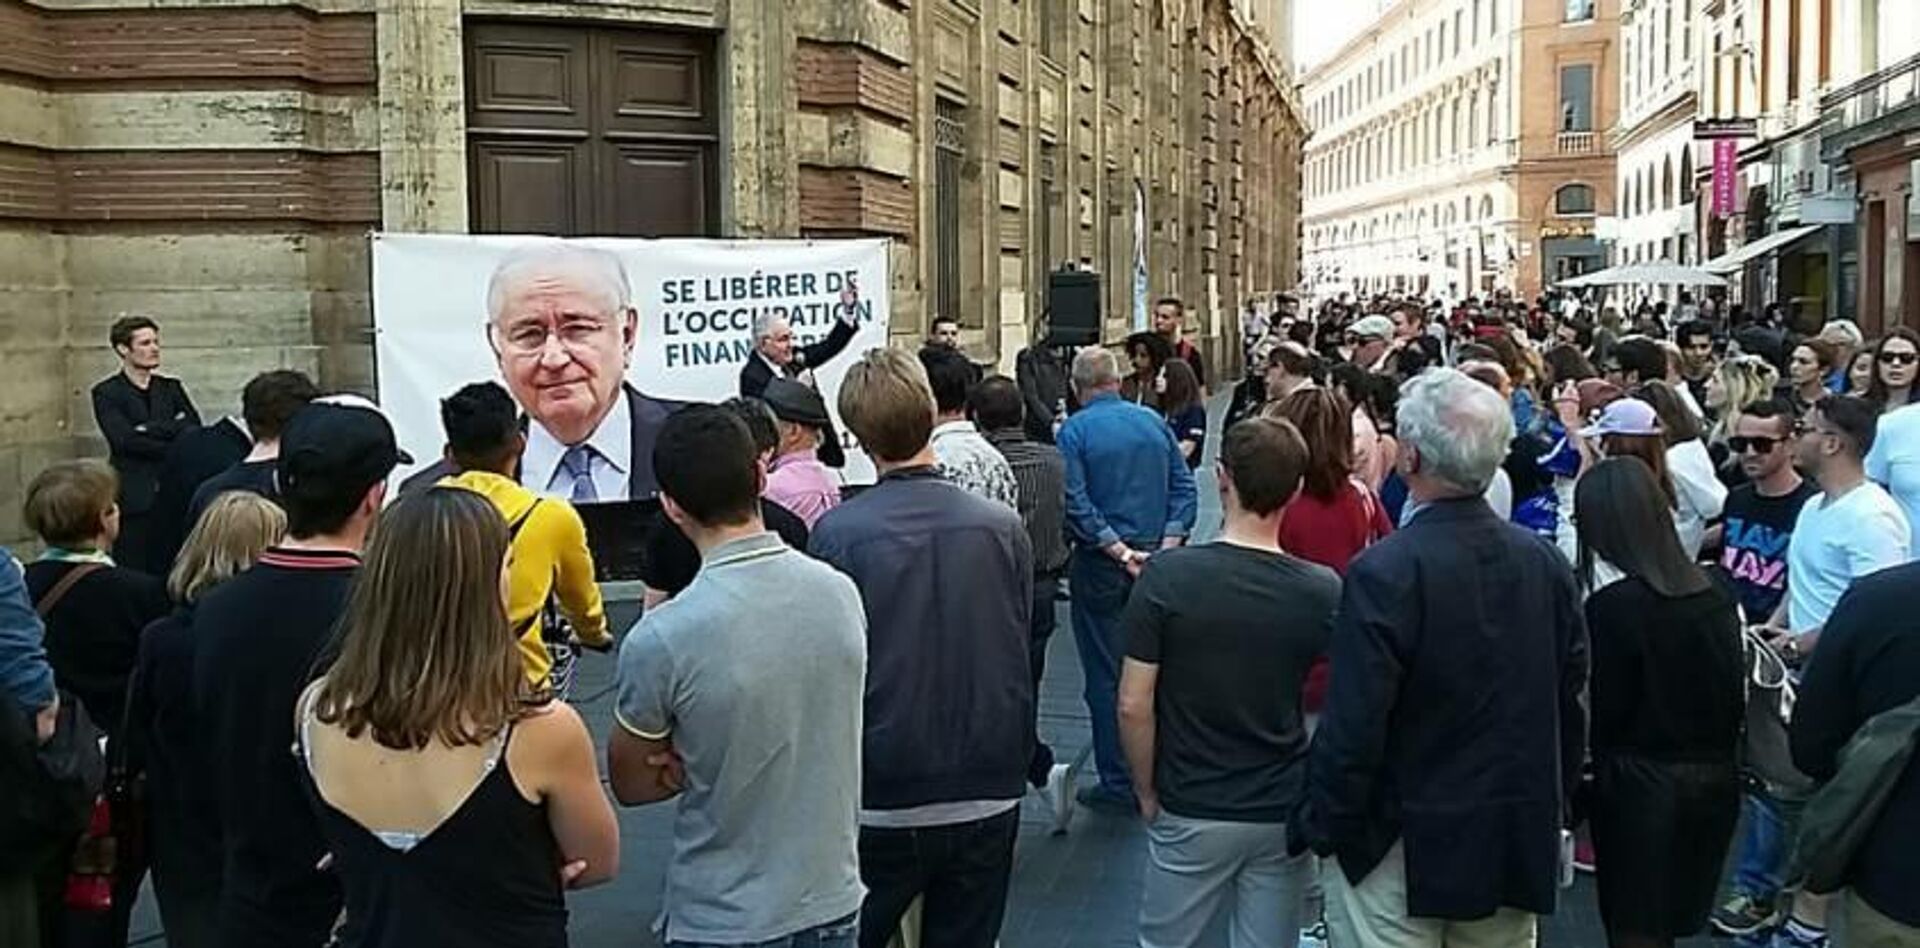 Jacques Cheminade, President of Solidarité & Progrès, in the streets of Toulouse 2017  - Sputnik International, 1920, 24.02.2022